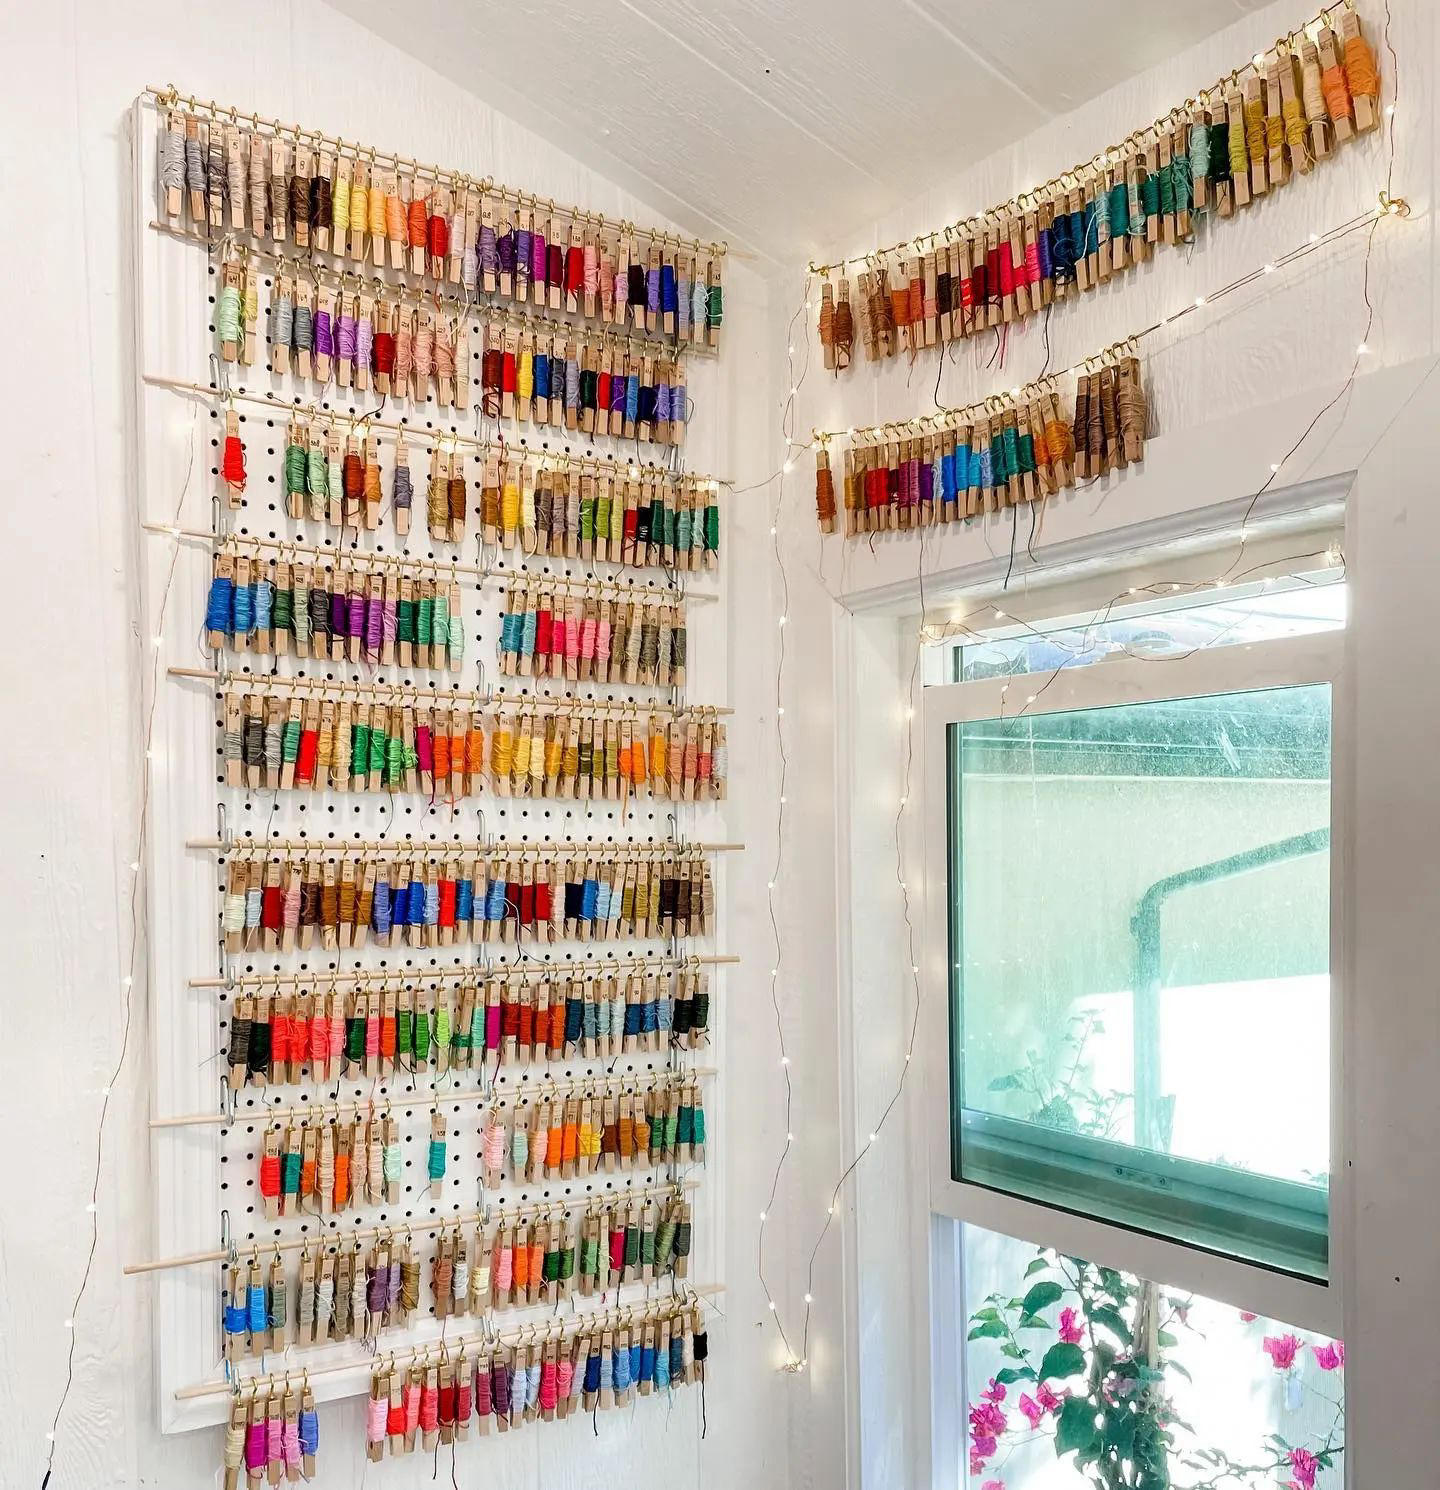 Best Craft Rooms #craftrooms - Reposted from #cre8tively